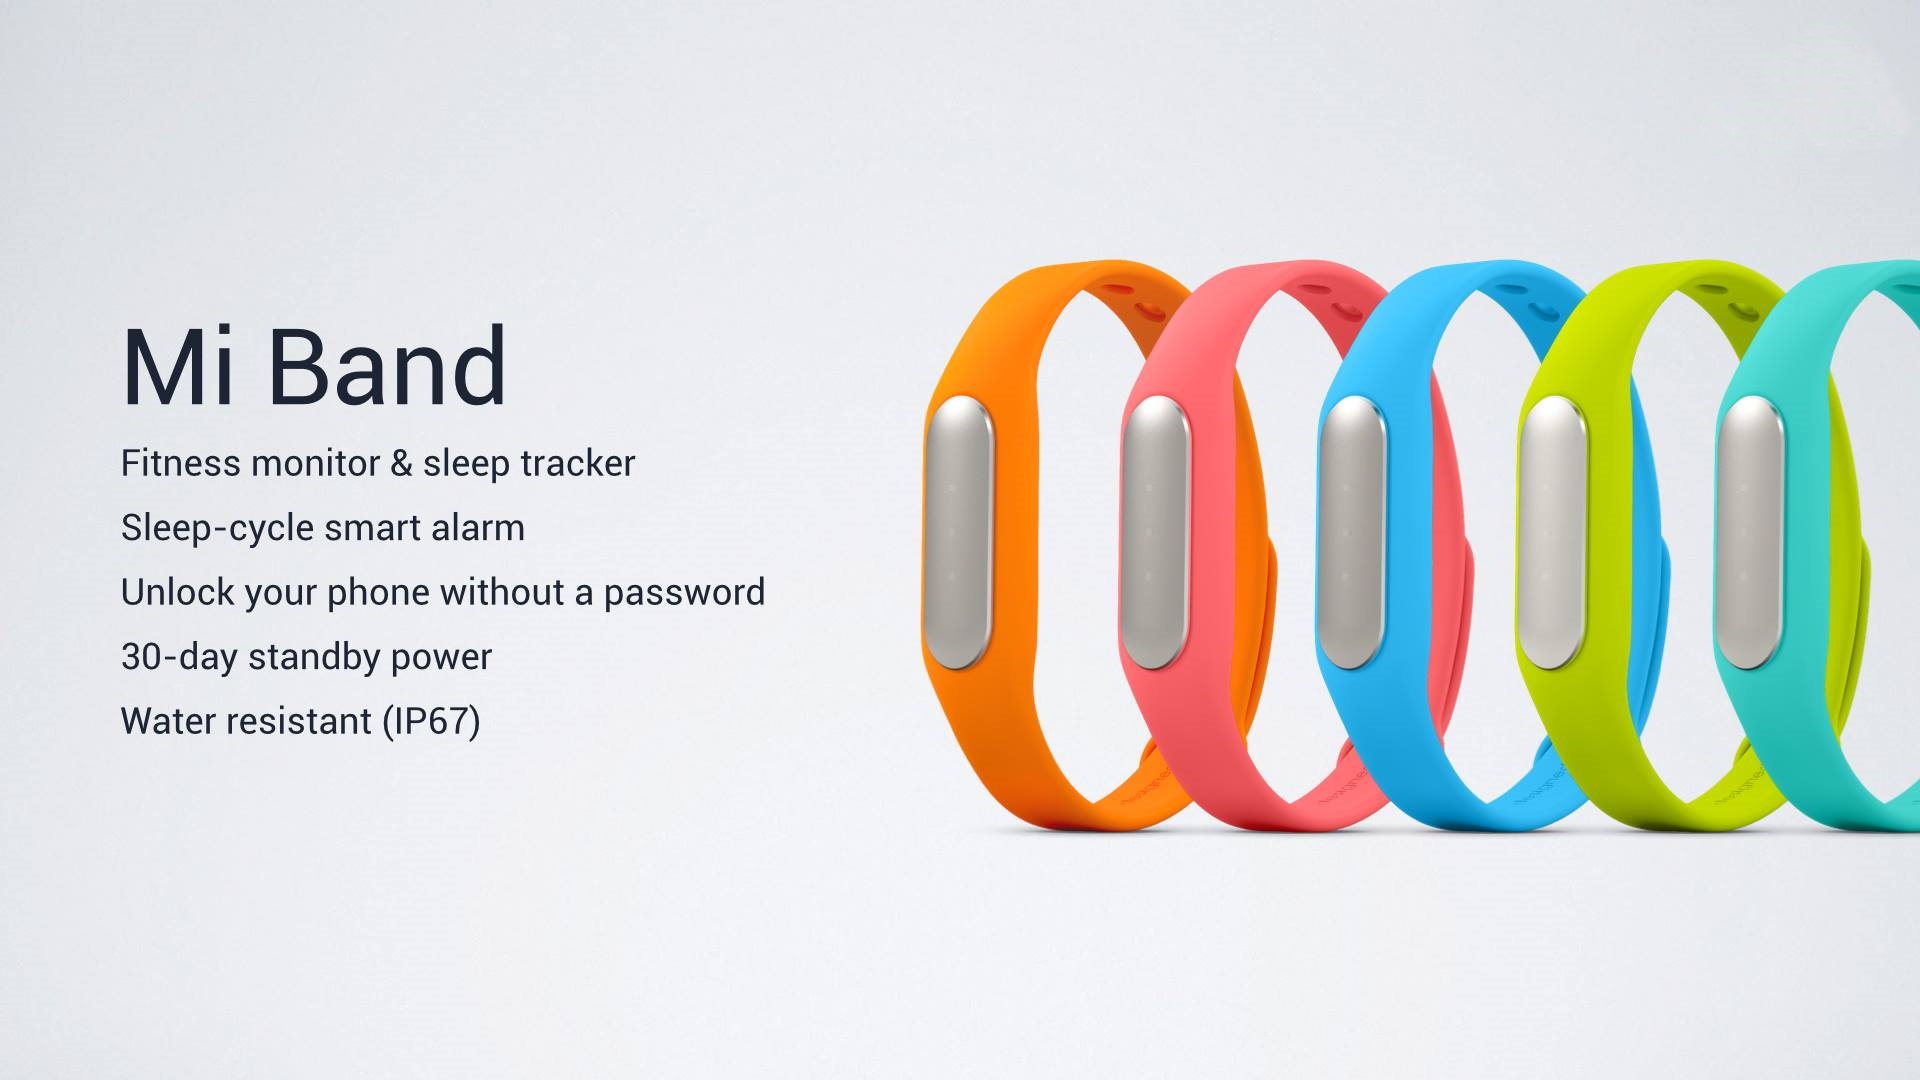 Xiaomi-Mi-Band specs and features